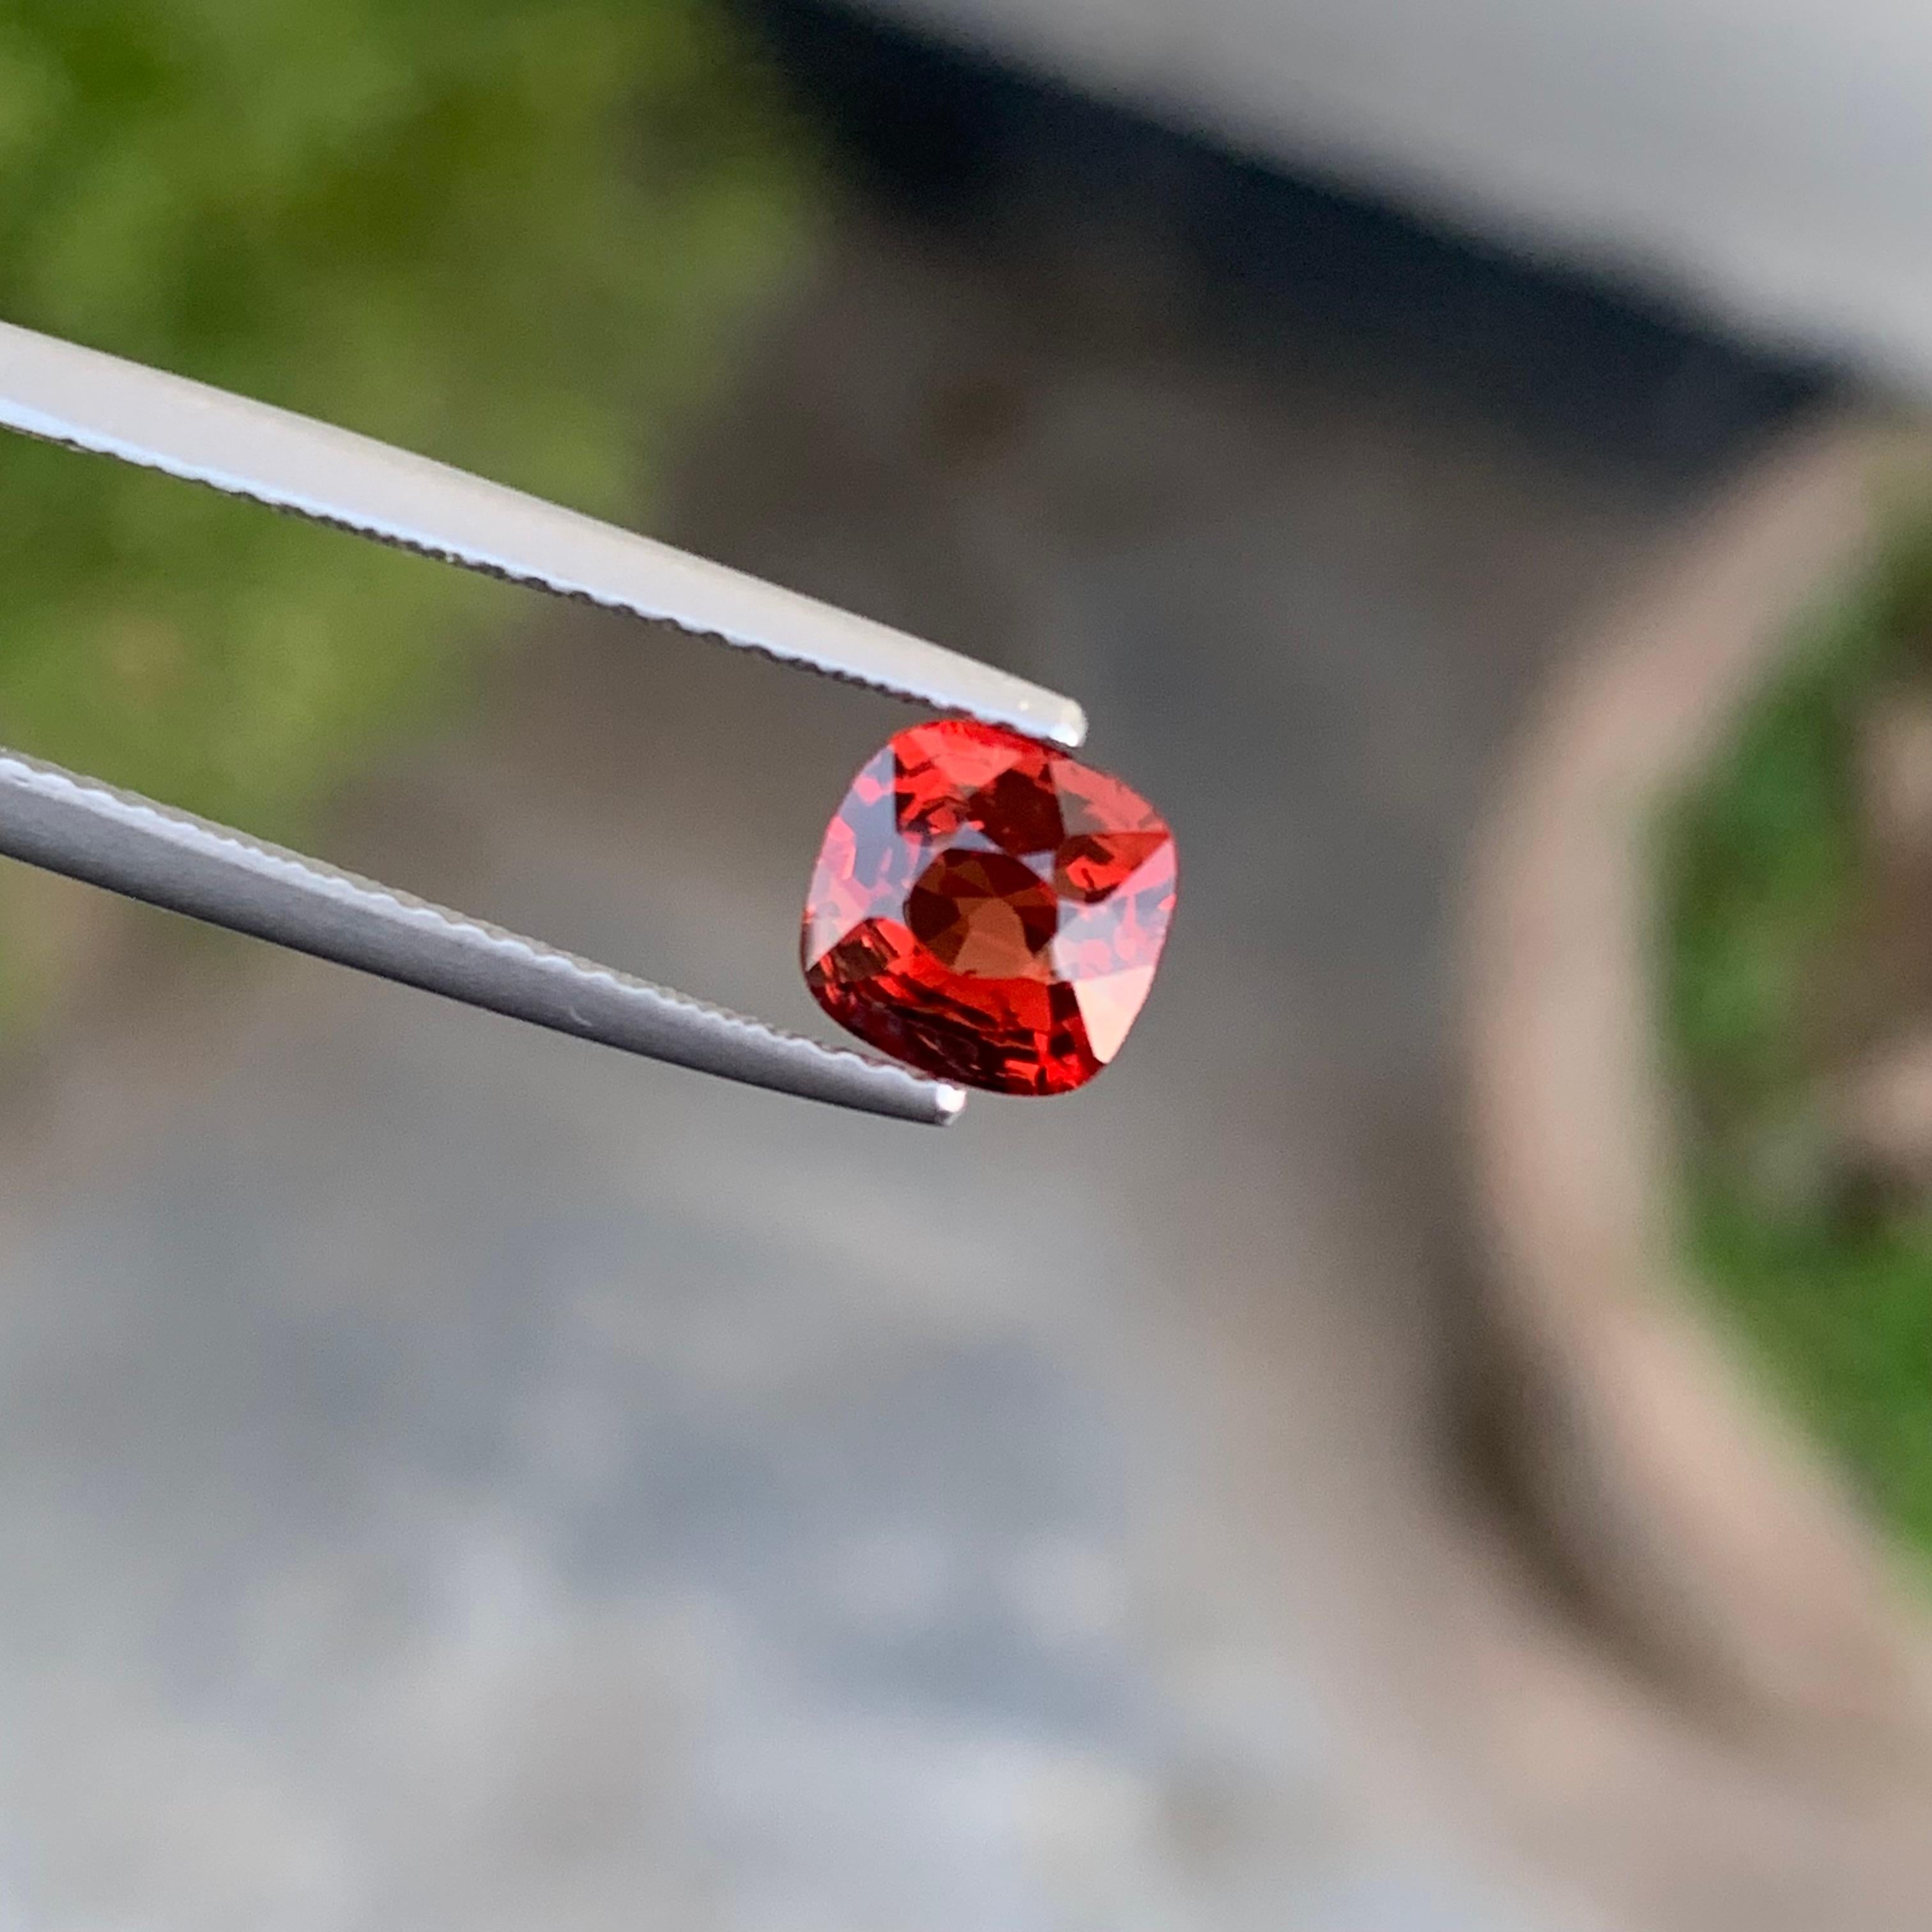 Charming 1.25 Carat Cushion Cut Loose Natural Red Spinel from Burma Myanmar 1